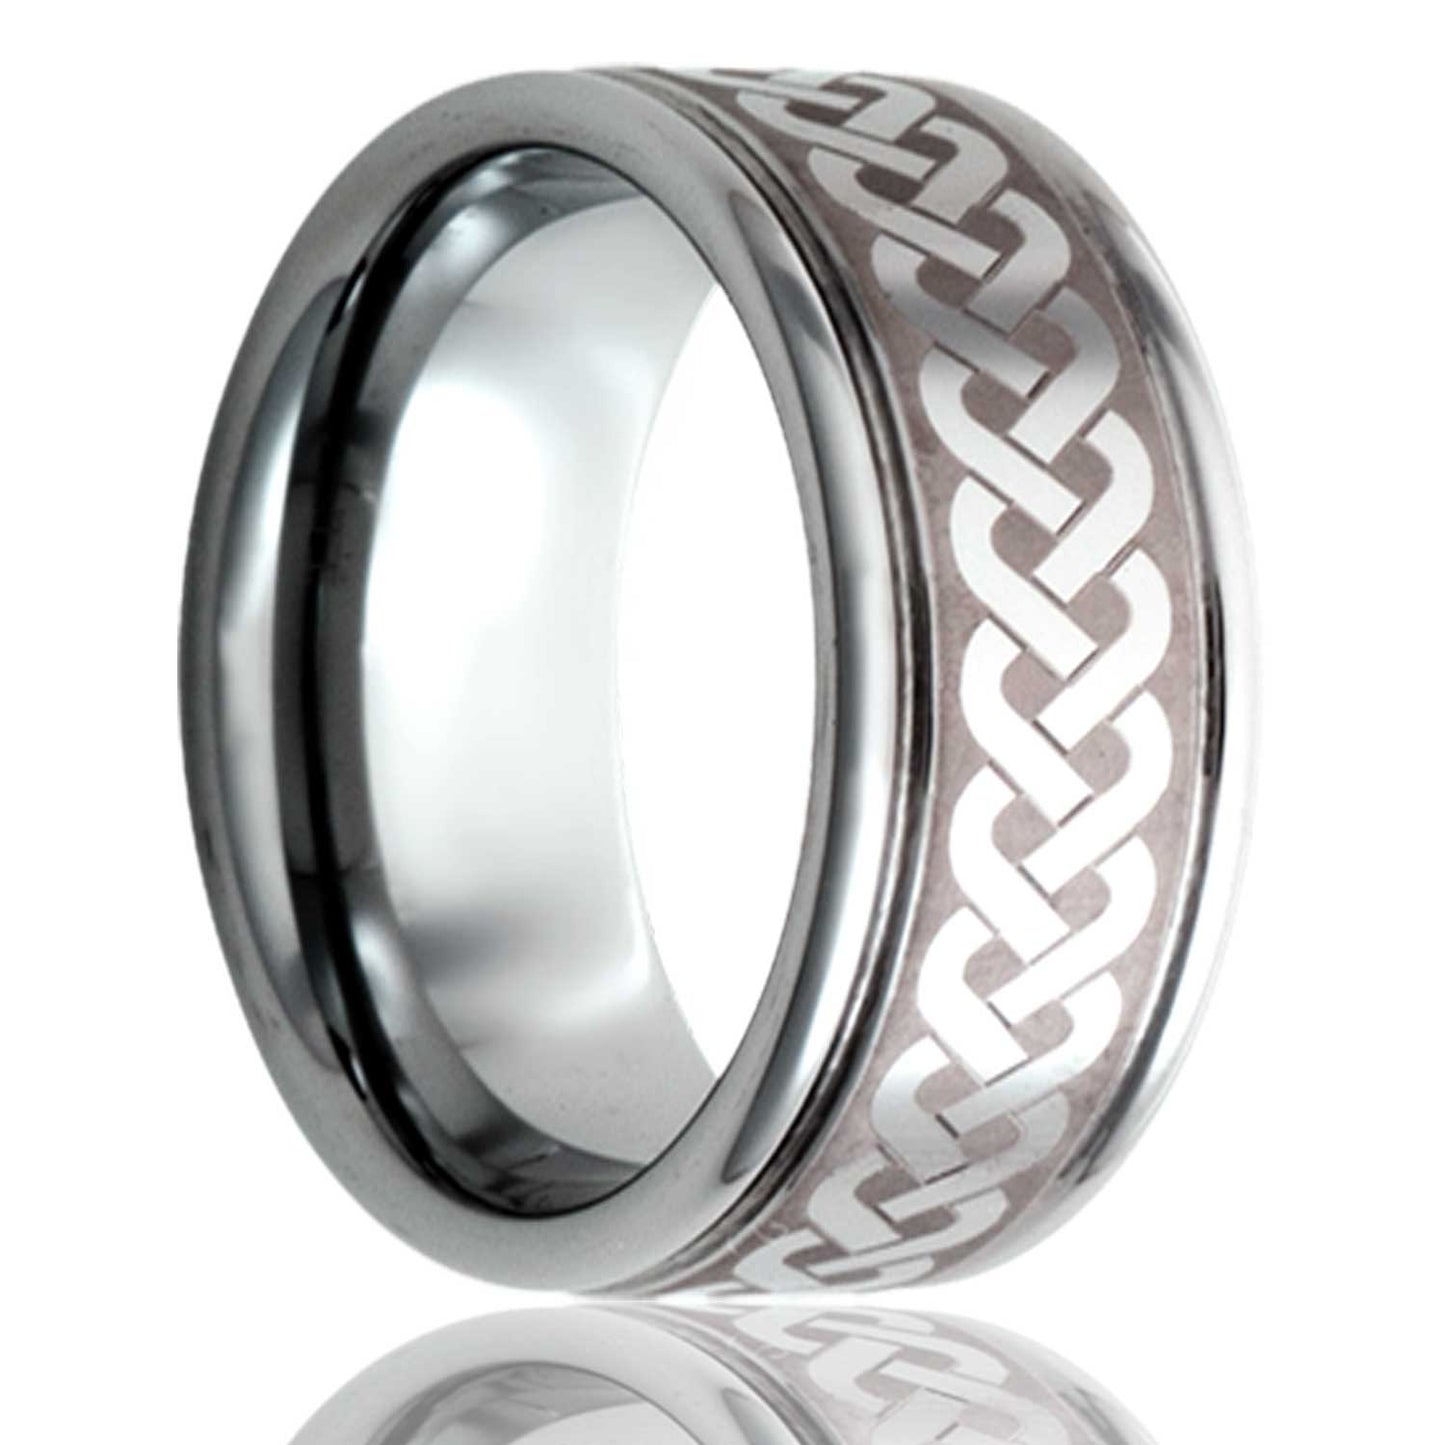 A sailor's celtic knot grooved titanium wedding band displayed on a neutral white background.